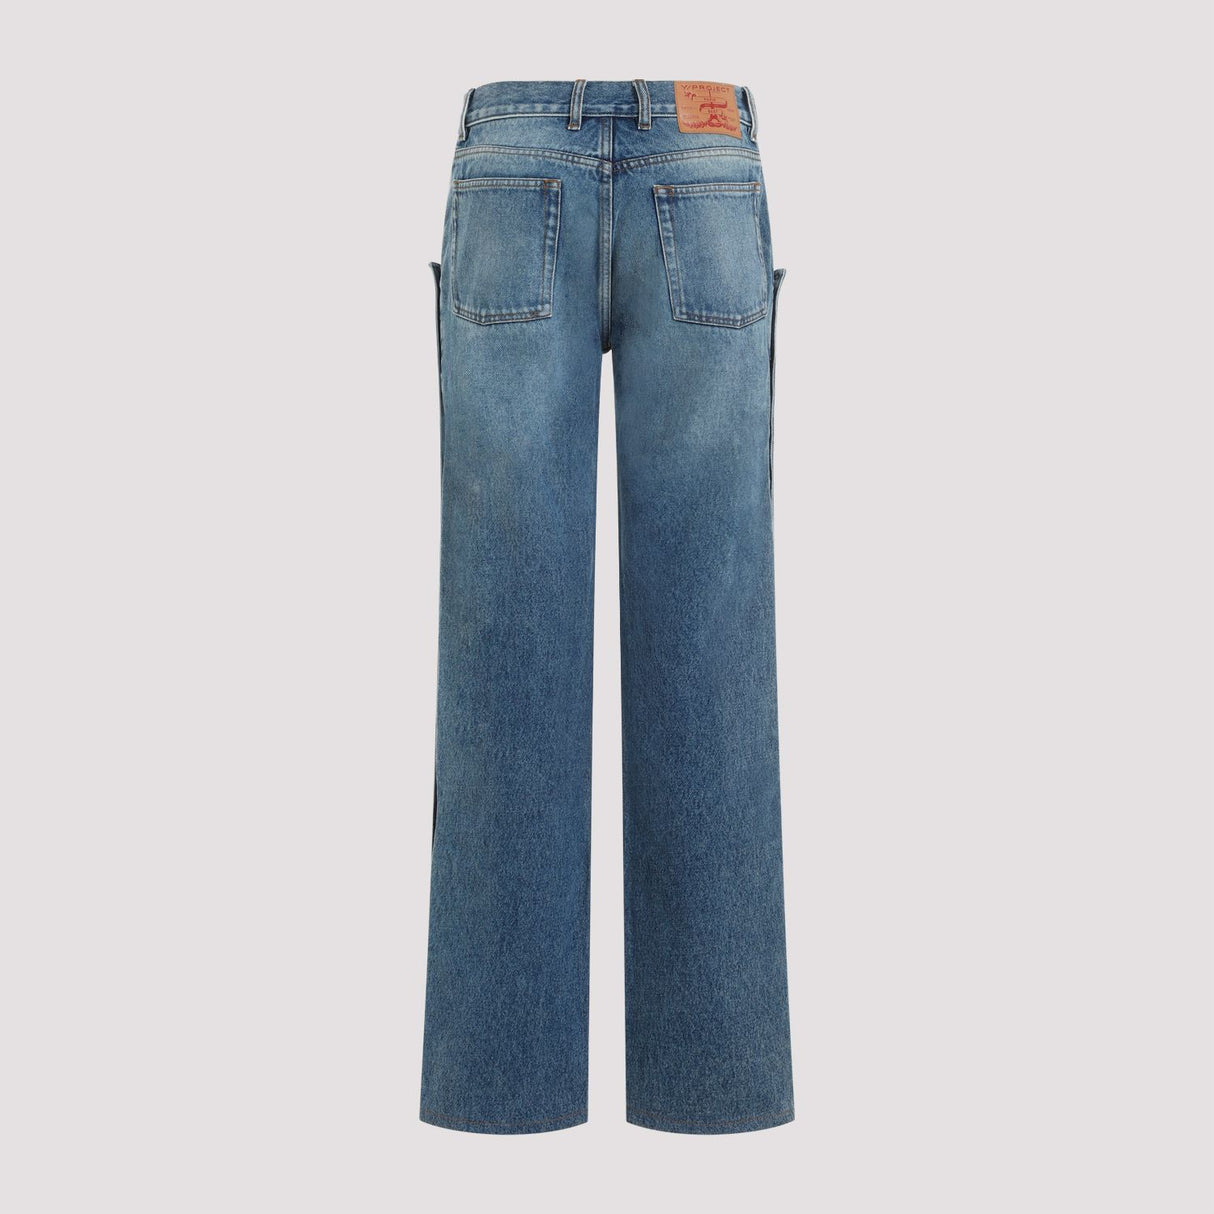 Y/PROJECT EVERGREEN SNAP OFF Quần Jeans